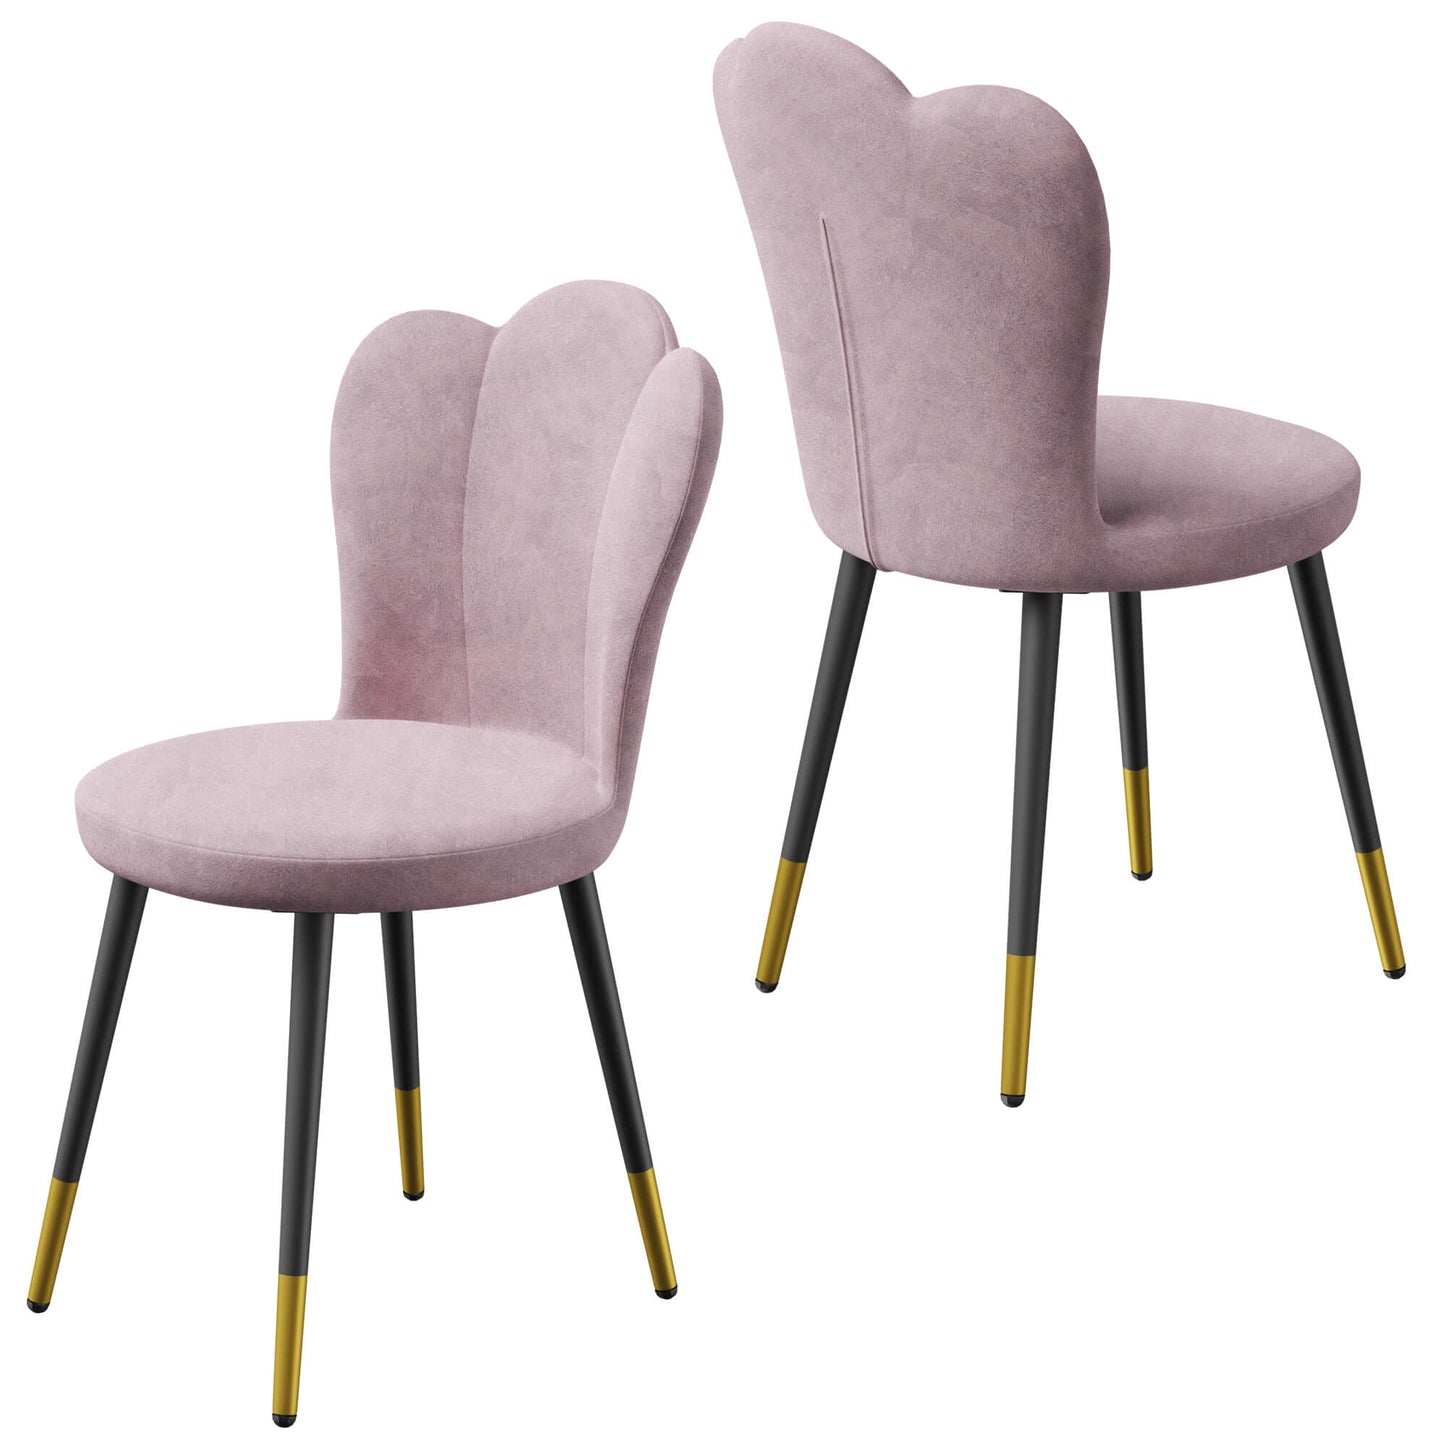 Kitchen & Dining Room Chairs, Upholstered Dining Chairs, Velvet Kitchen Chairs Set of 2, Dusty Pink